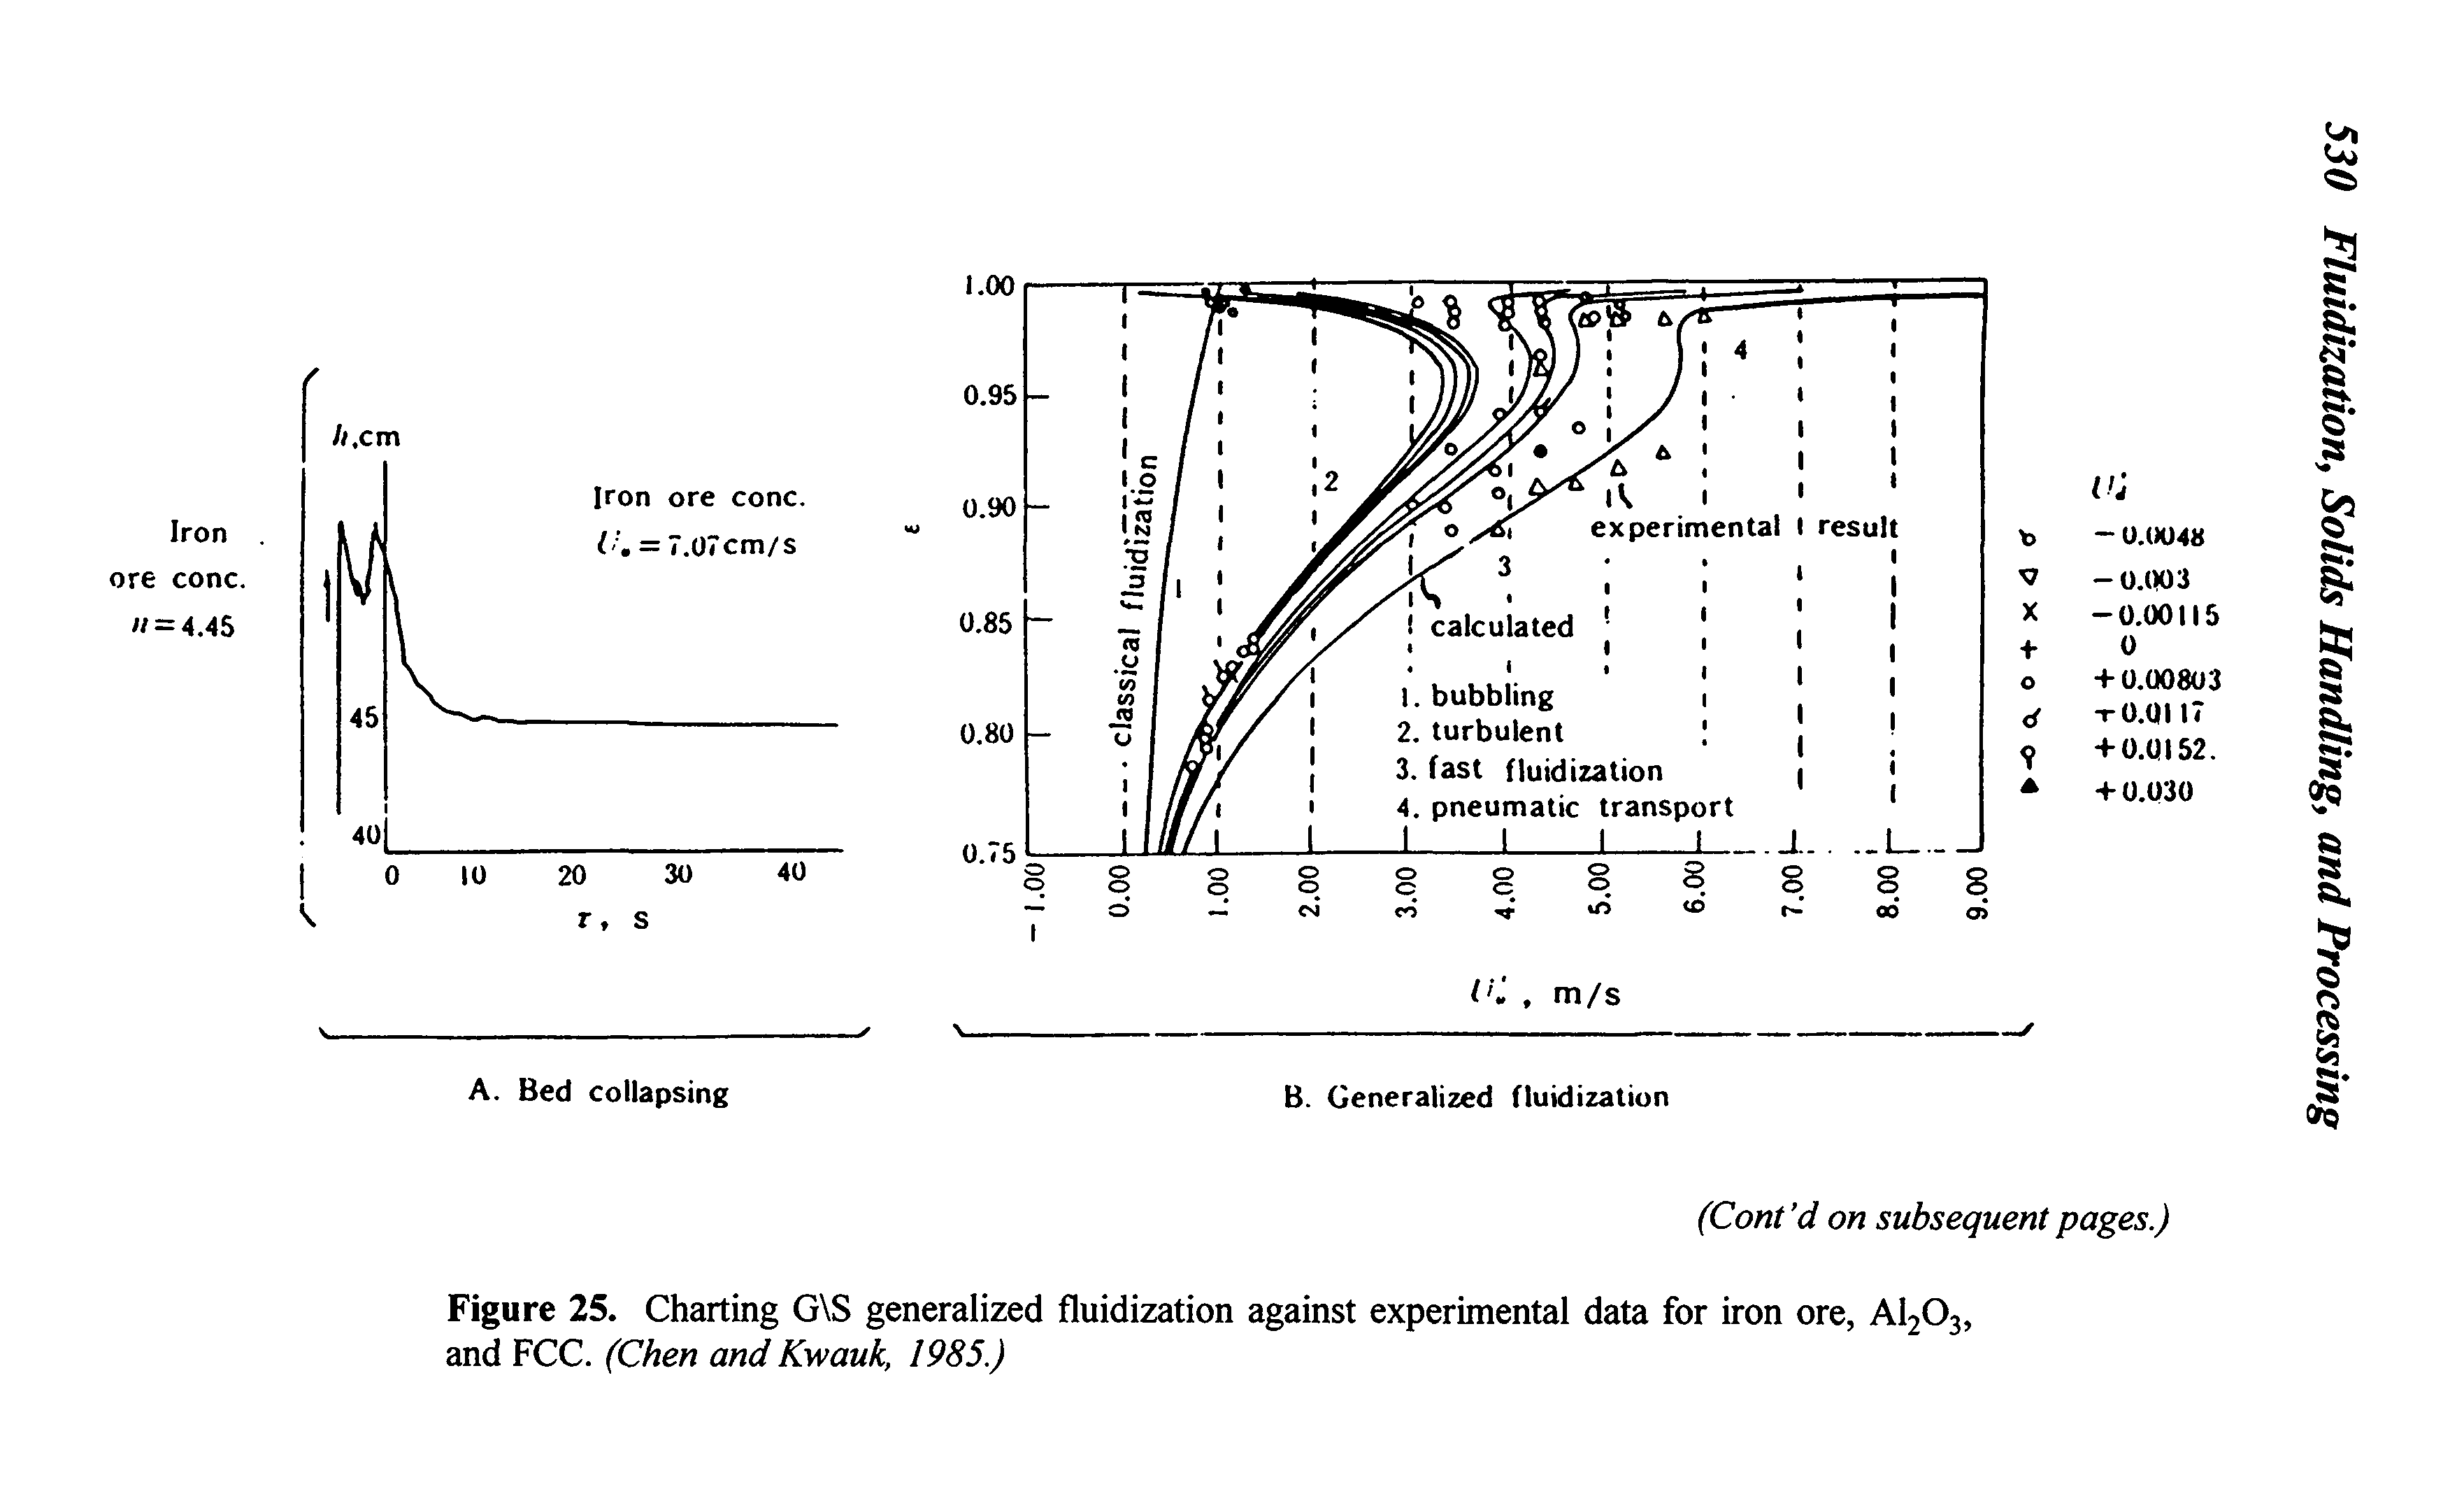 Figure 25. Charting G S generalized fluidization against experimental data for iron ore, A1203, and FCC. (Chen and Kwauk, 1985.)...